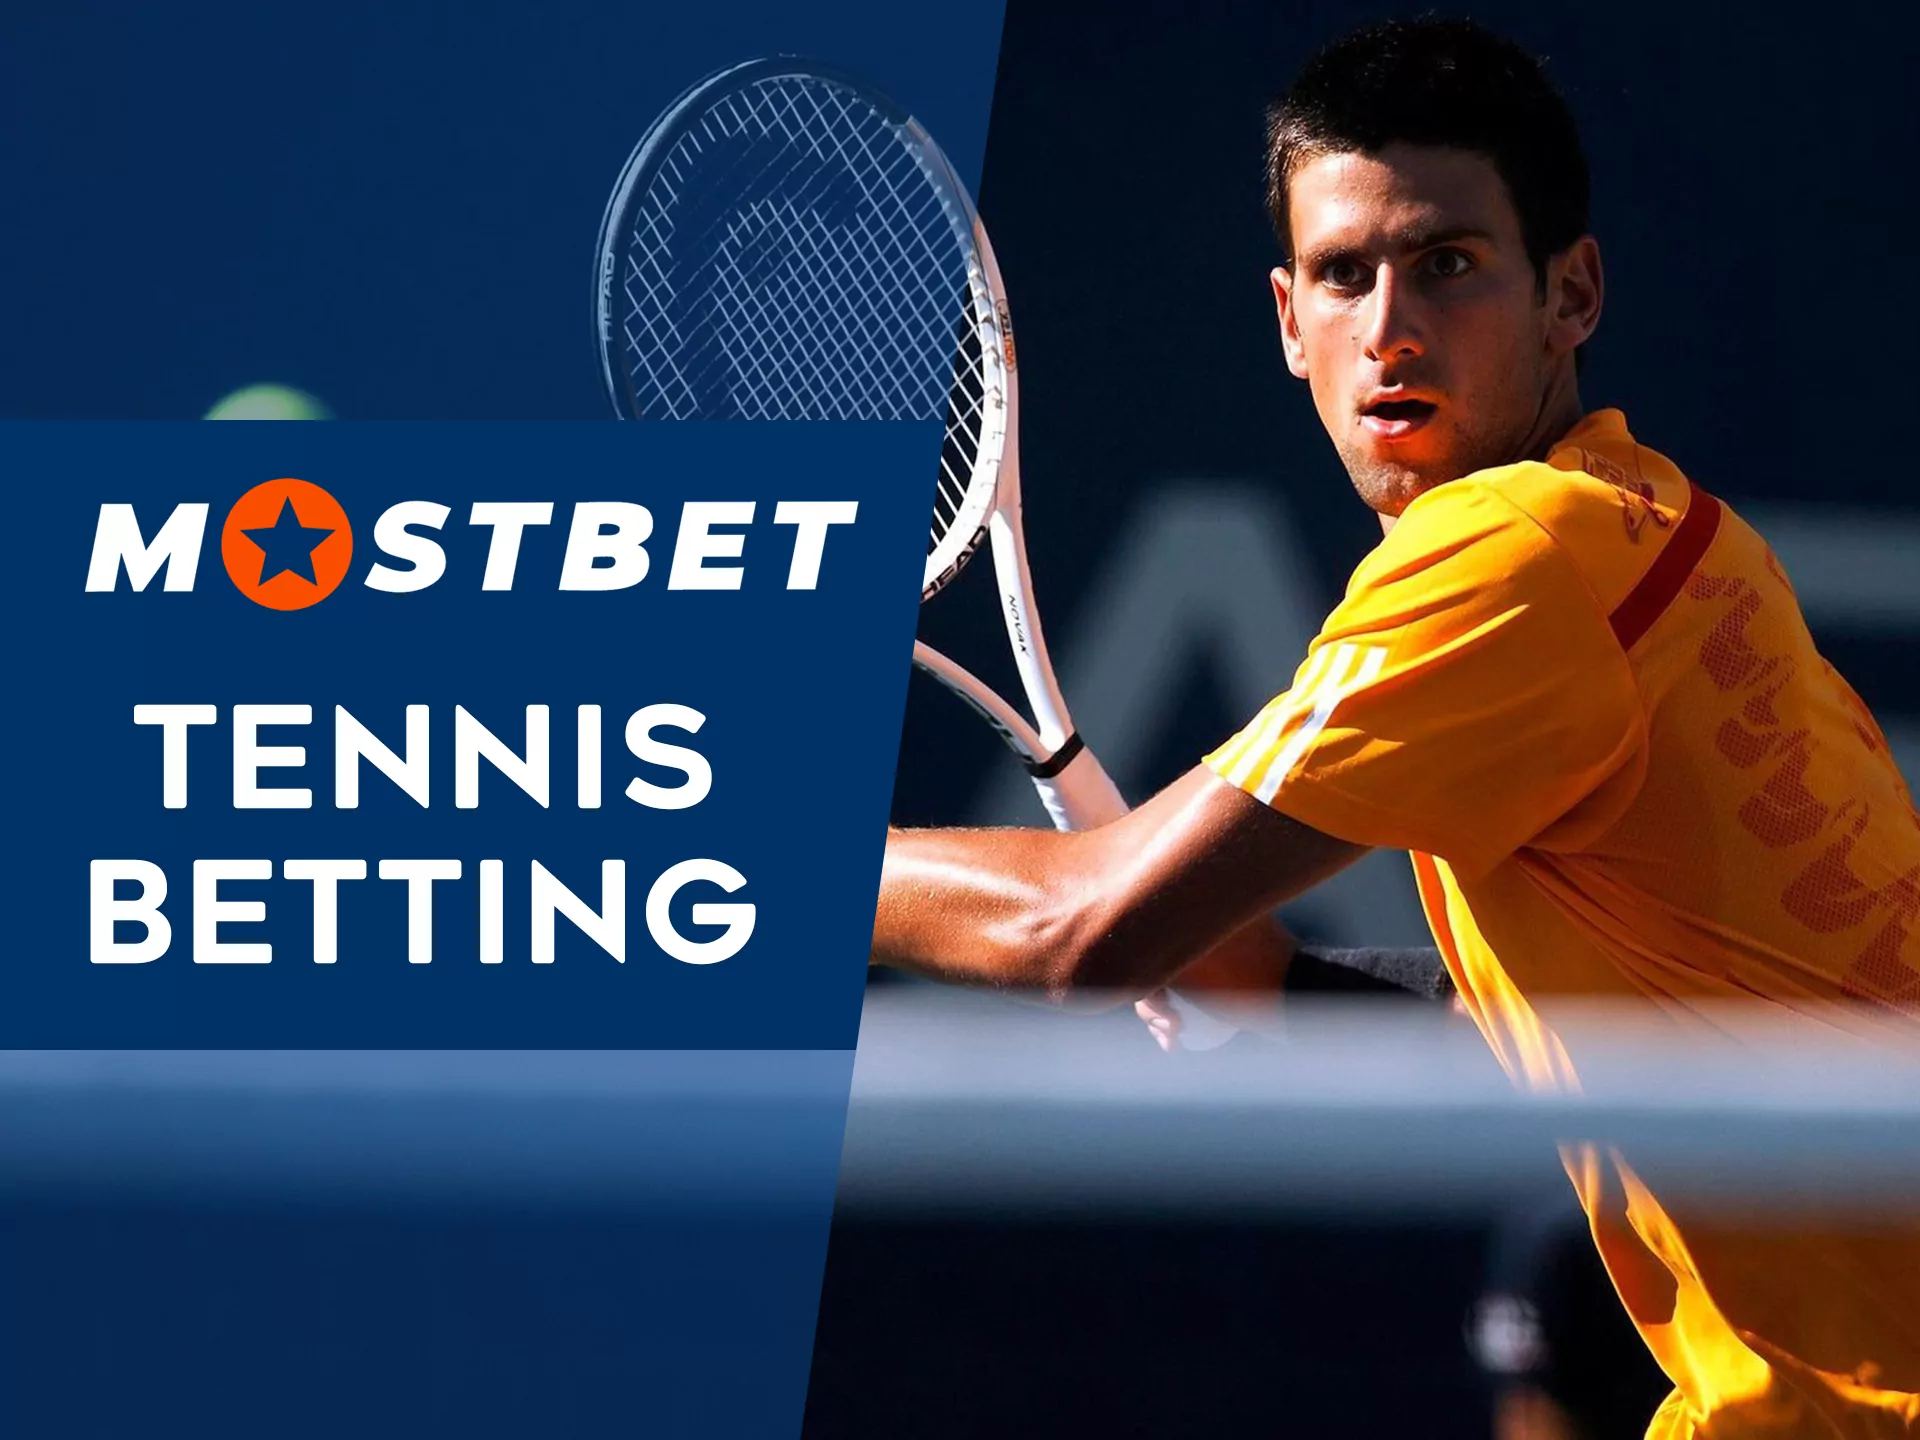 Tennis is another good discipline for online betting with Mostbet.